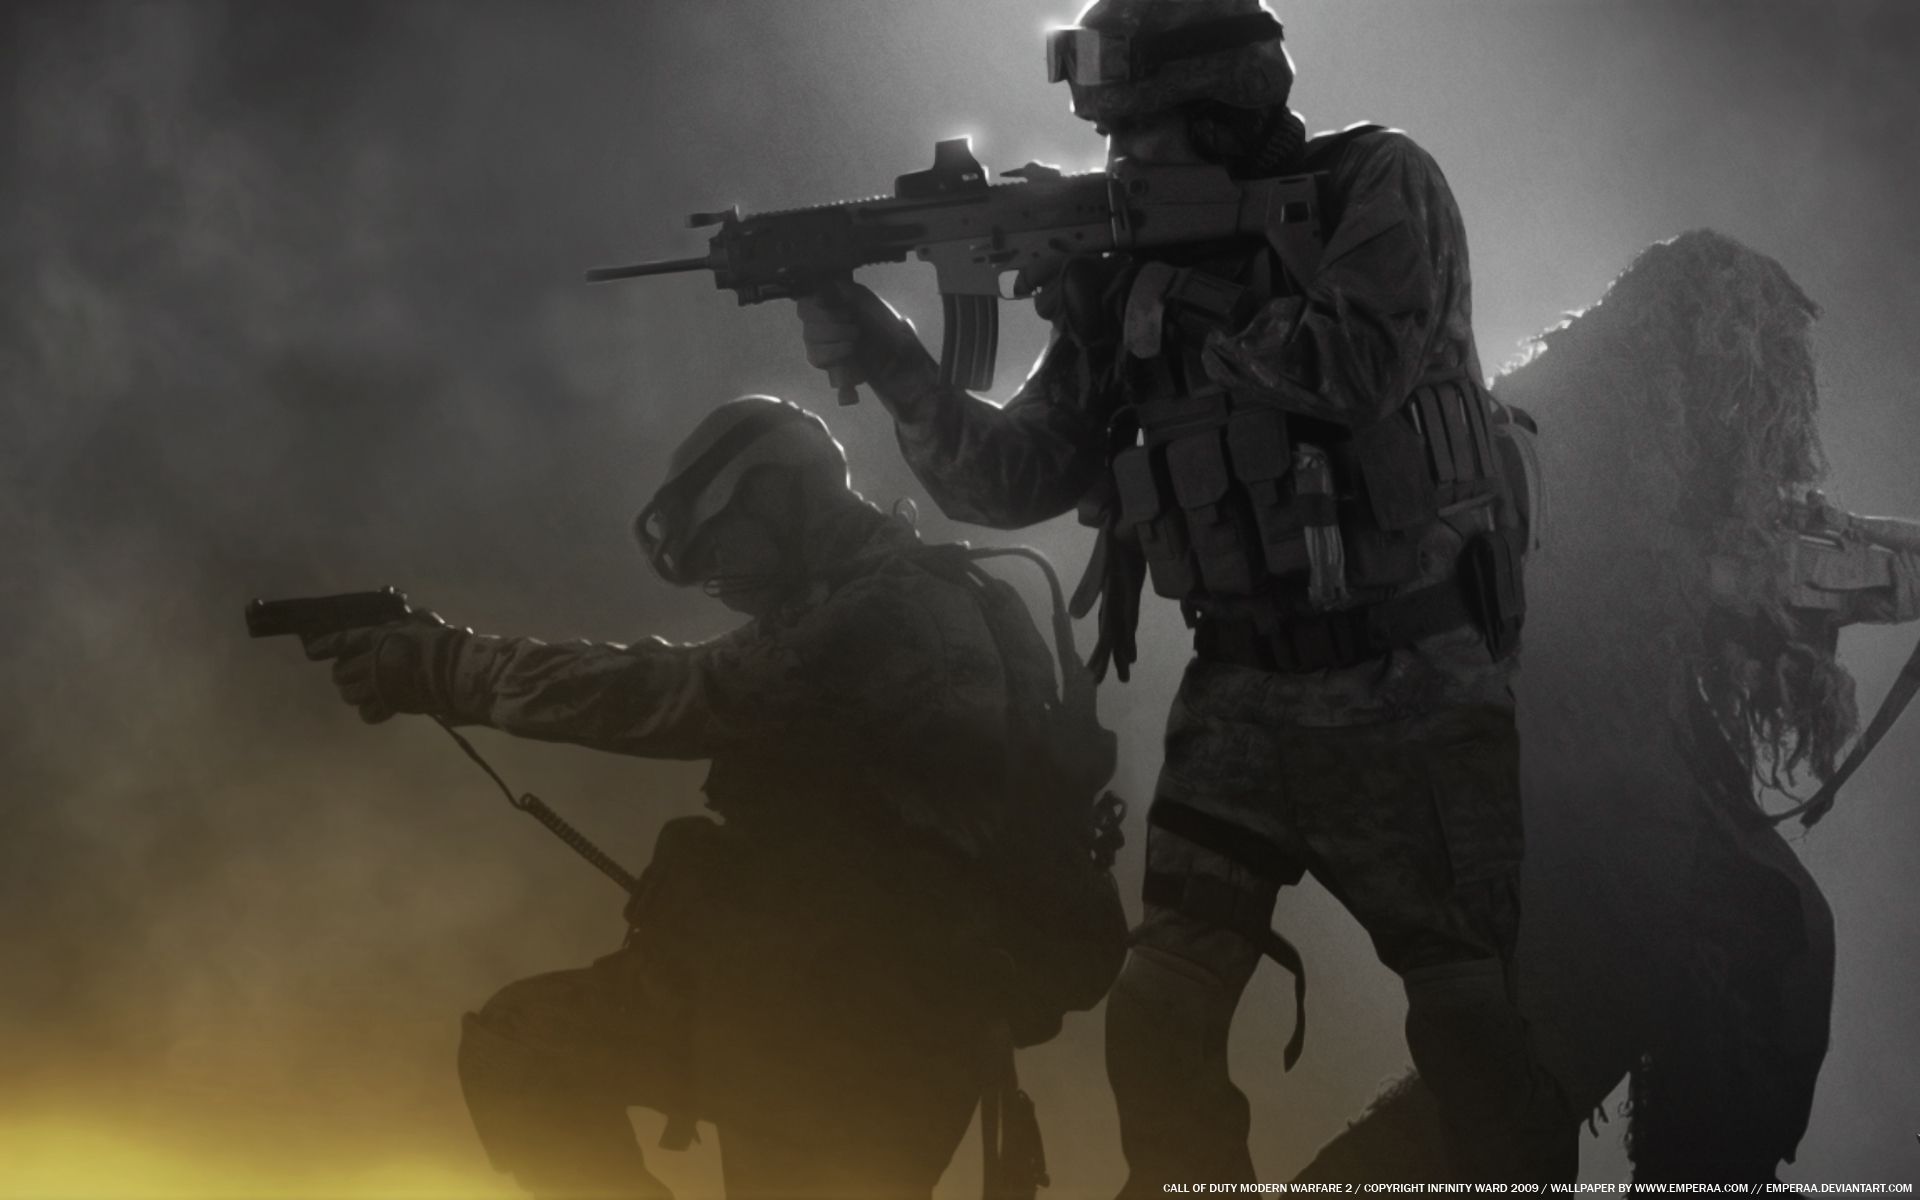 Special Forces in the fog wallpapers and images - wallpapers ...